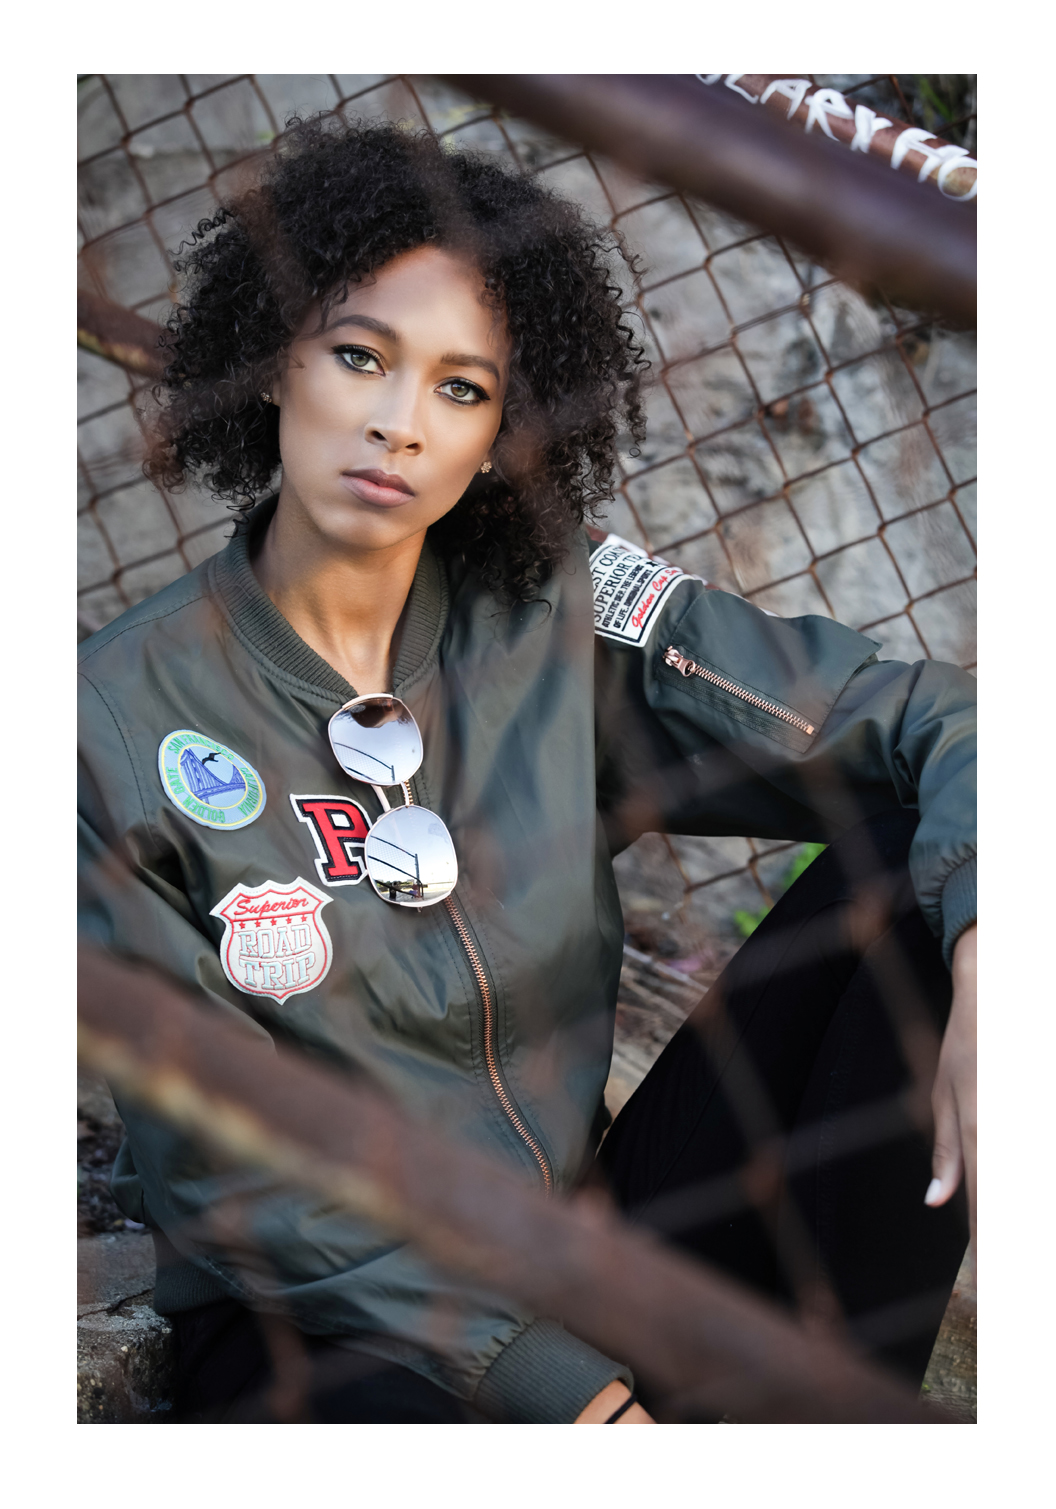 A teenage model sits behind a chain link fence, facing the photographer. She has curly black hair and wears a leather jacket with decorative patches